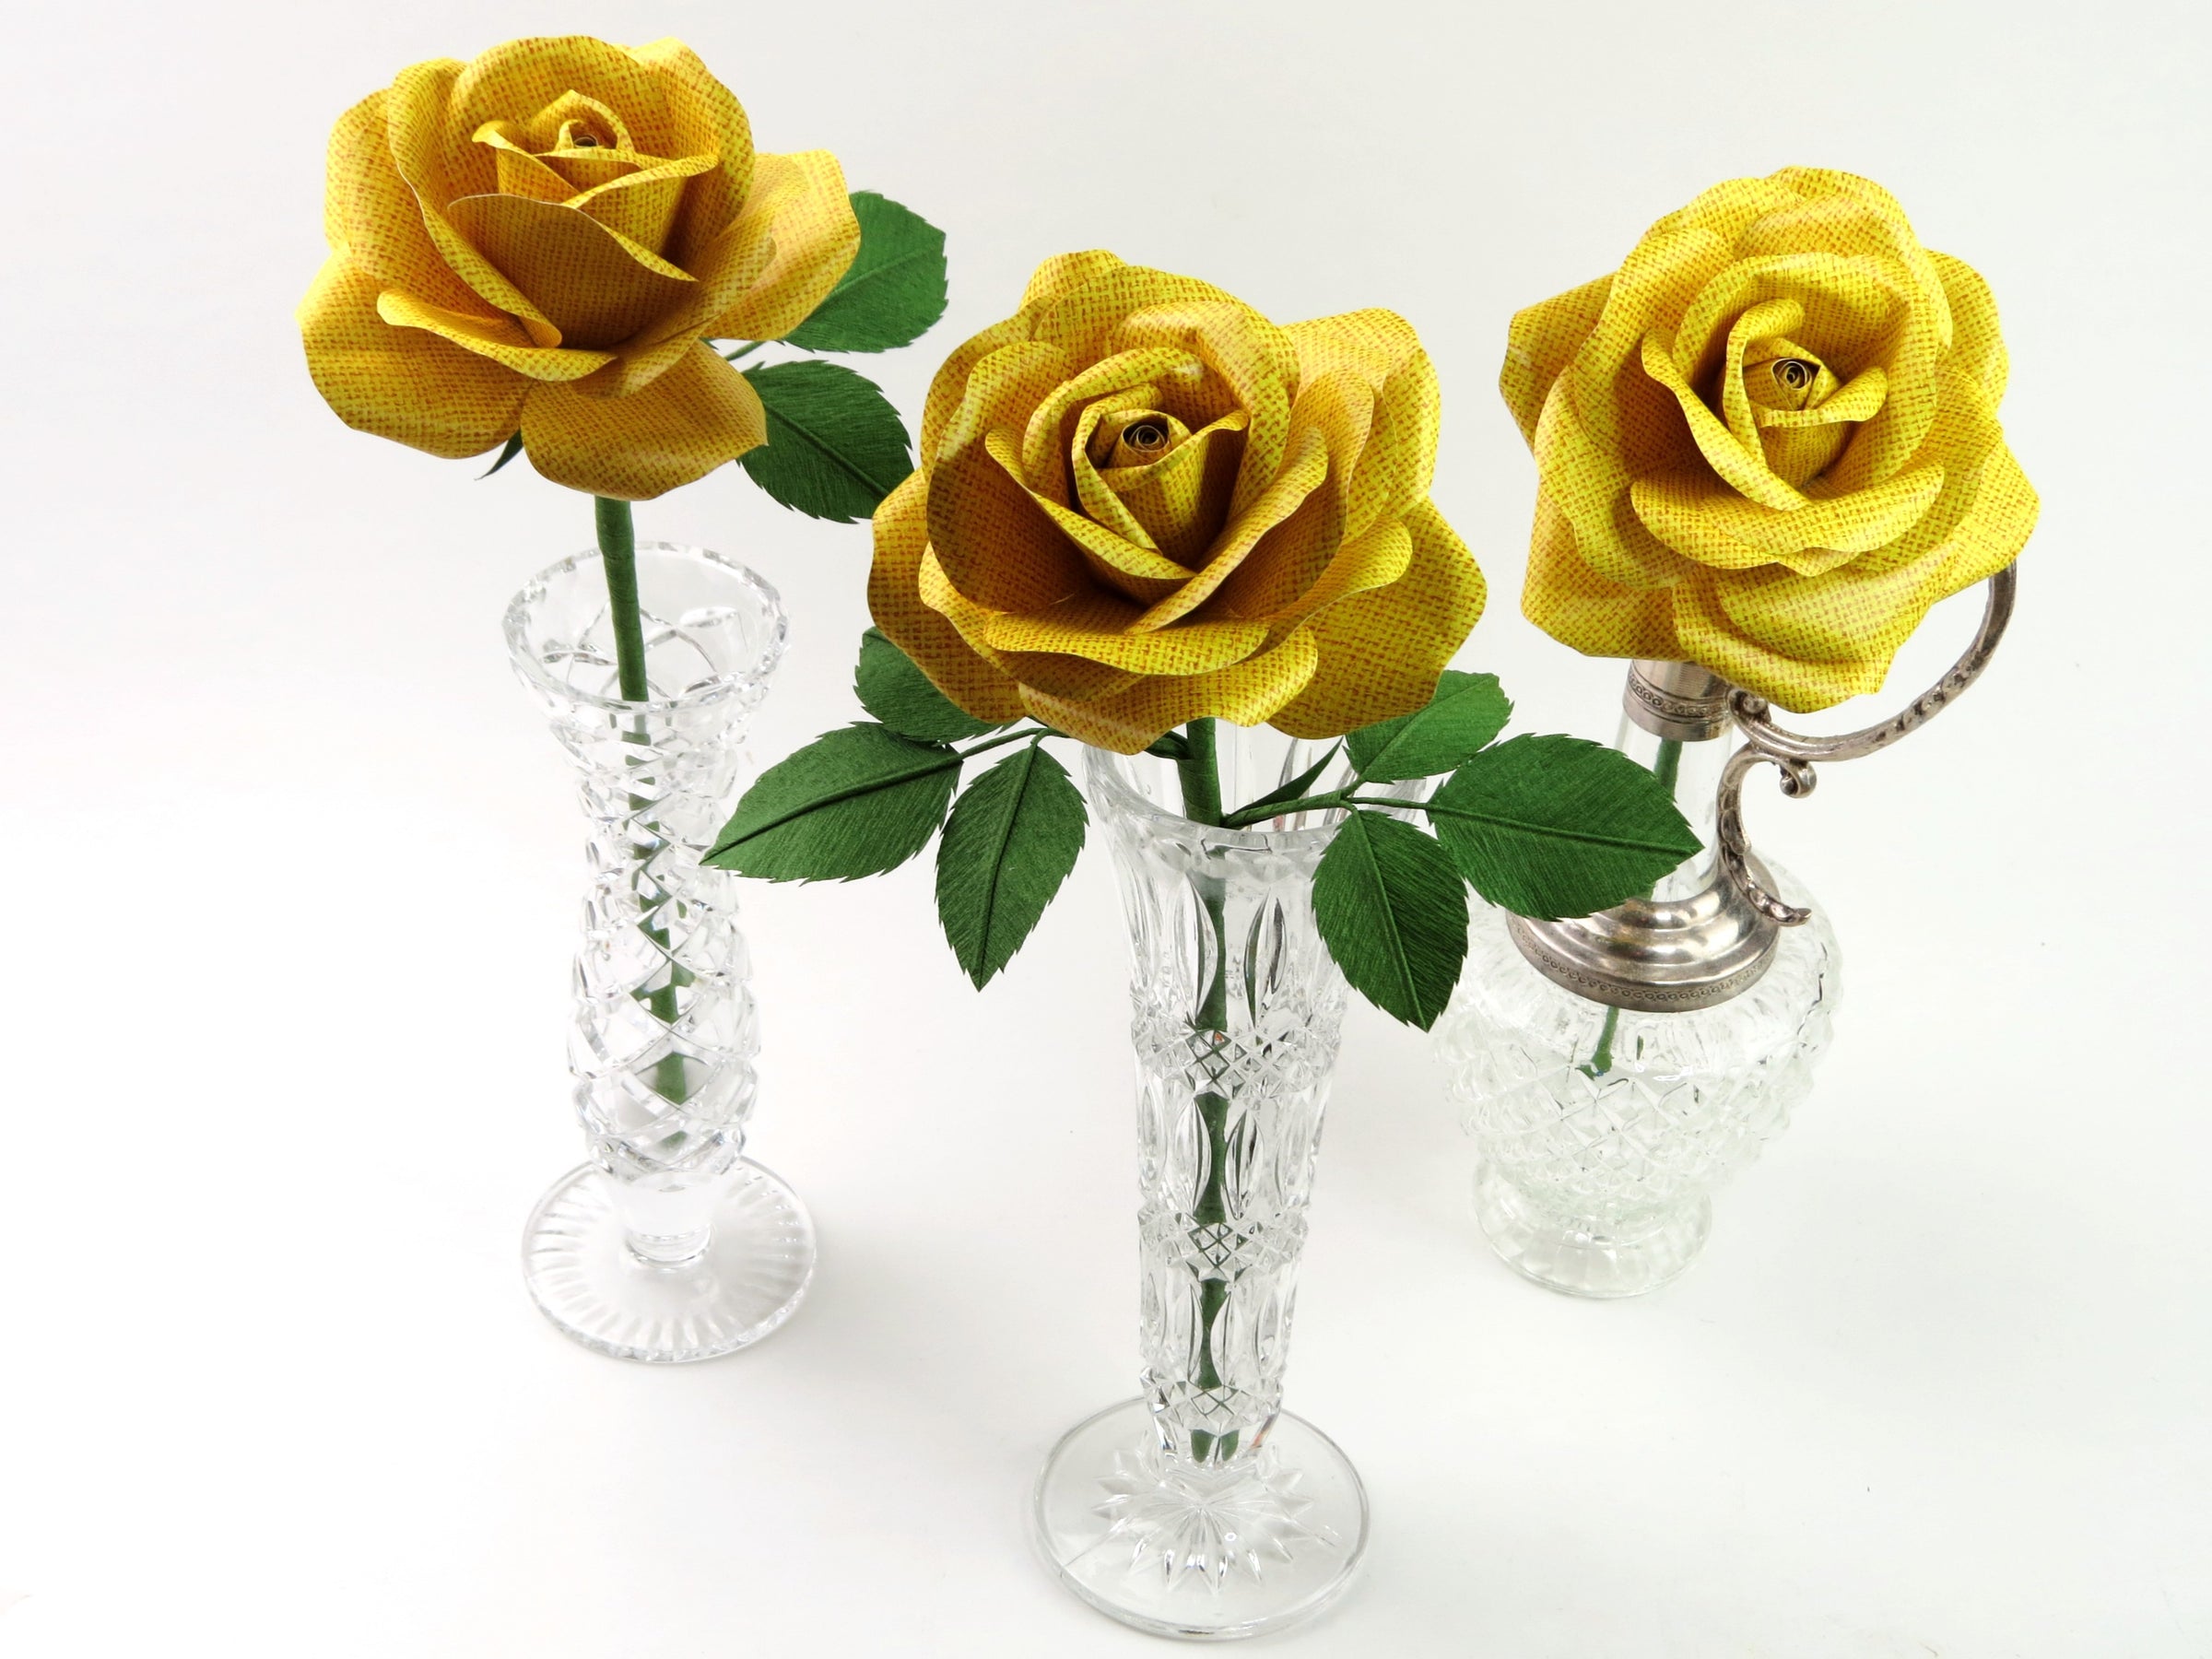 Three yellow linen grain paper roses each standing by itself in three different mismatched glass vases against a light grey background. The left rose has three green leaves attached, the middle rose has six leaves and the right rose has no leaves.